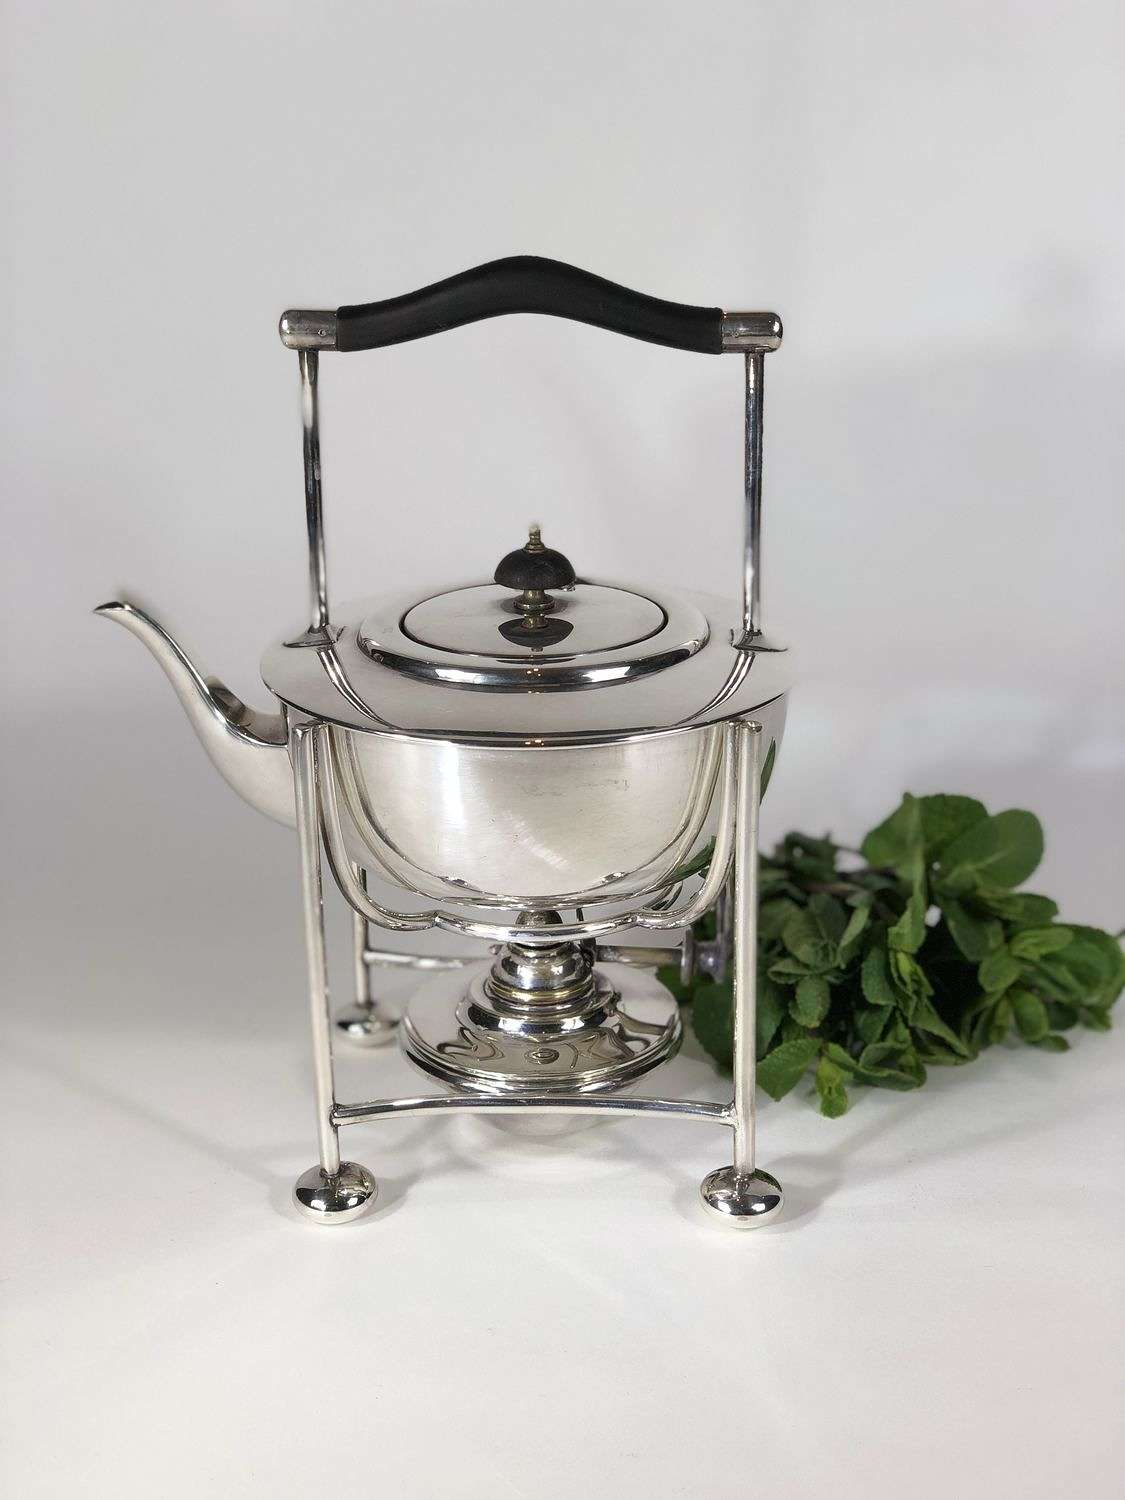 Art Deco English silver plated warming teapot kettle